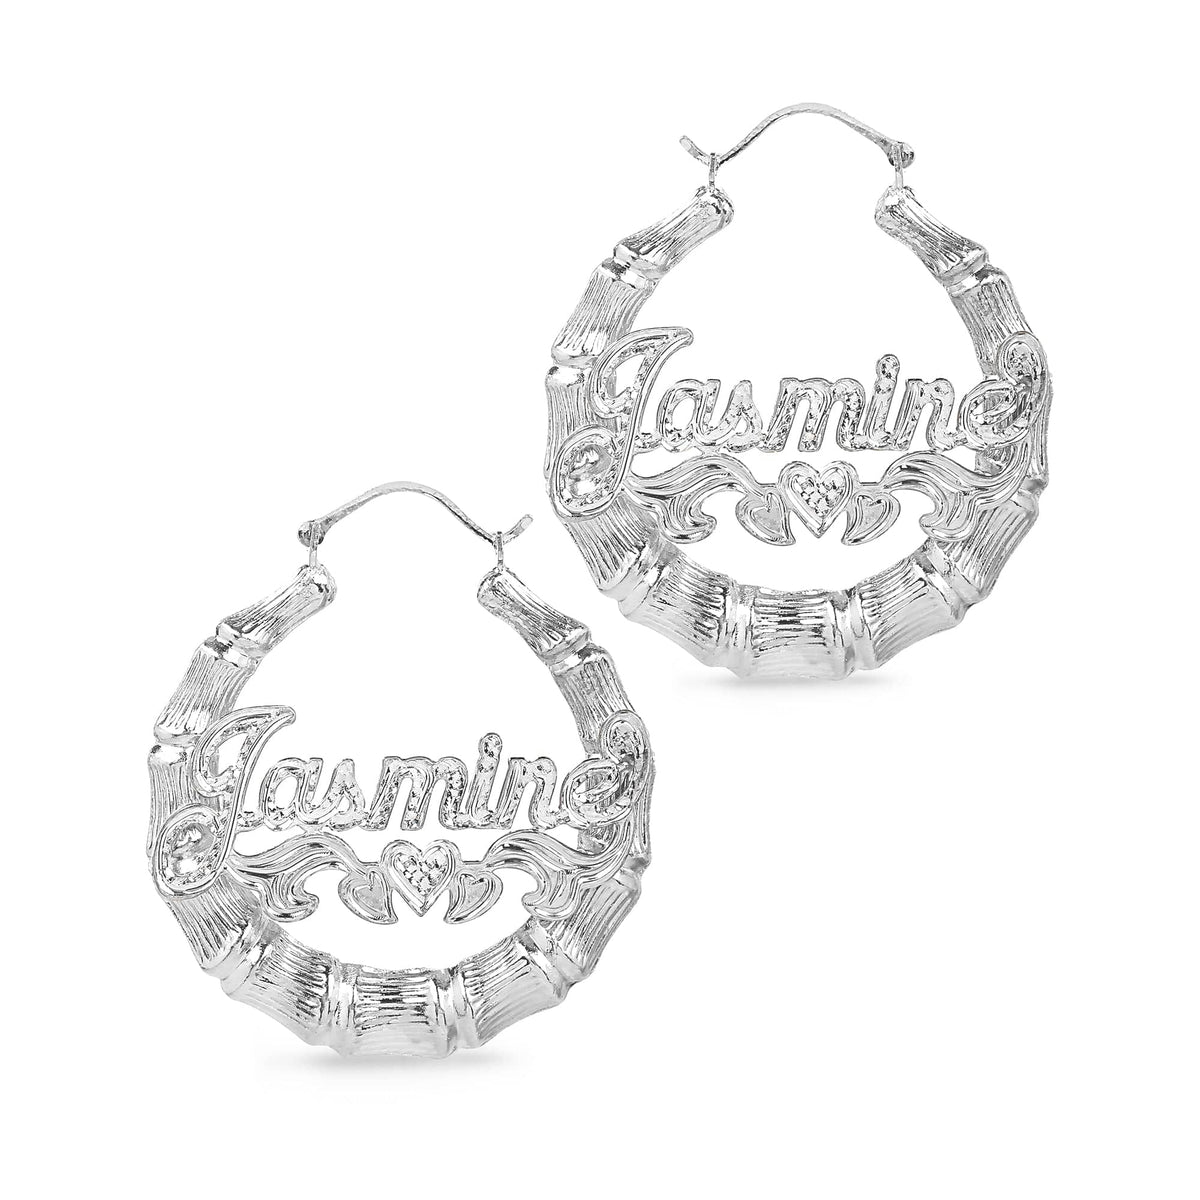 Silver Plated Copy of Script Name Earrings with Beading/Rhodium